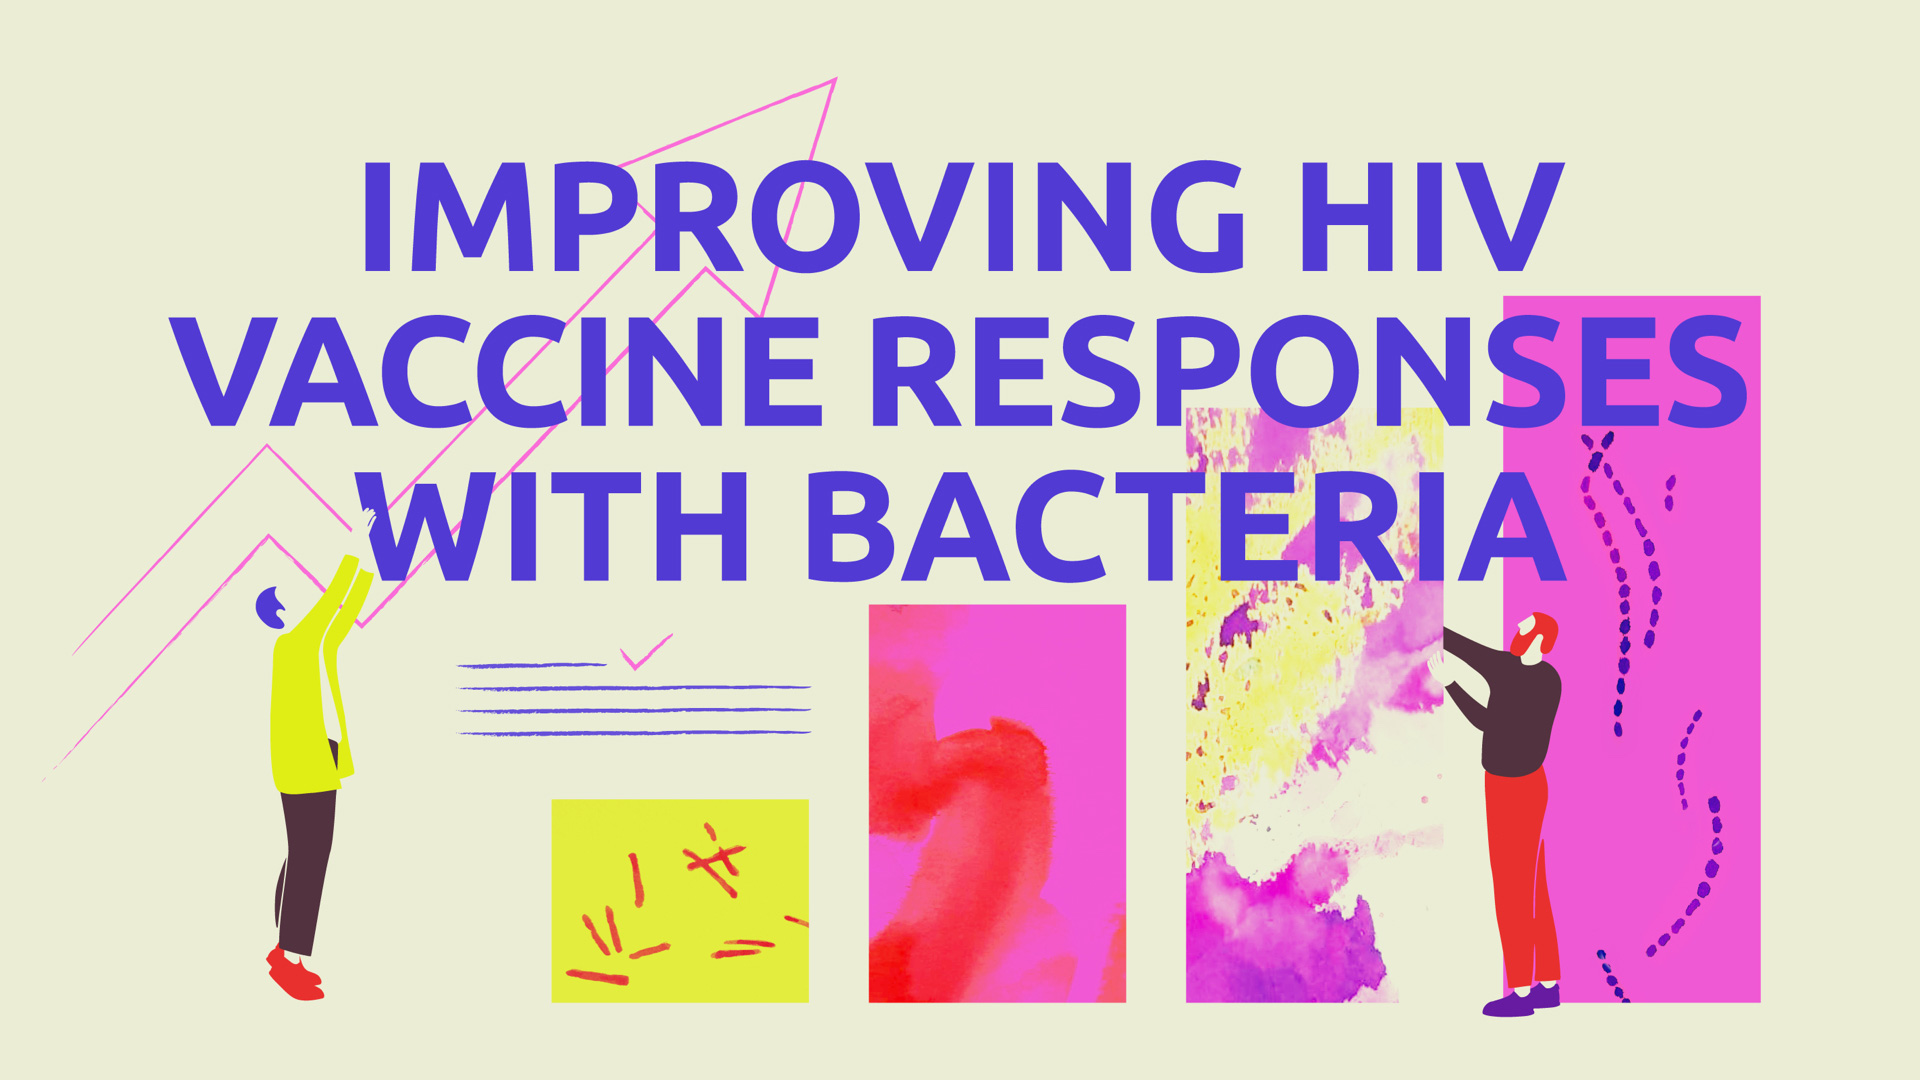 Improving HIV vaccine responses with bacteria